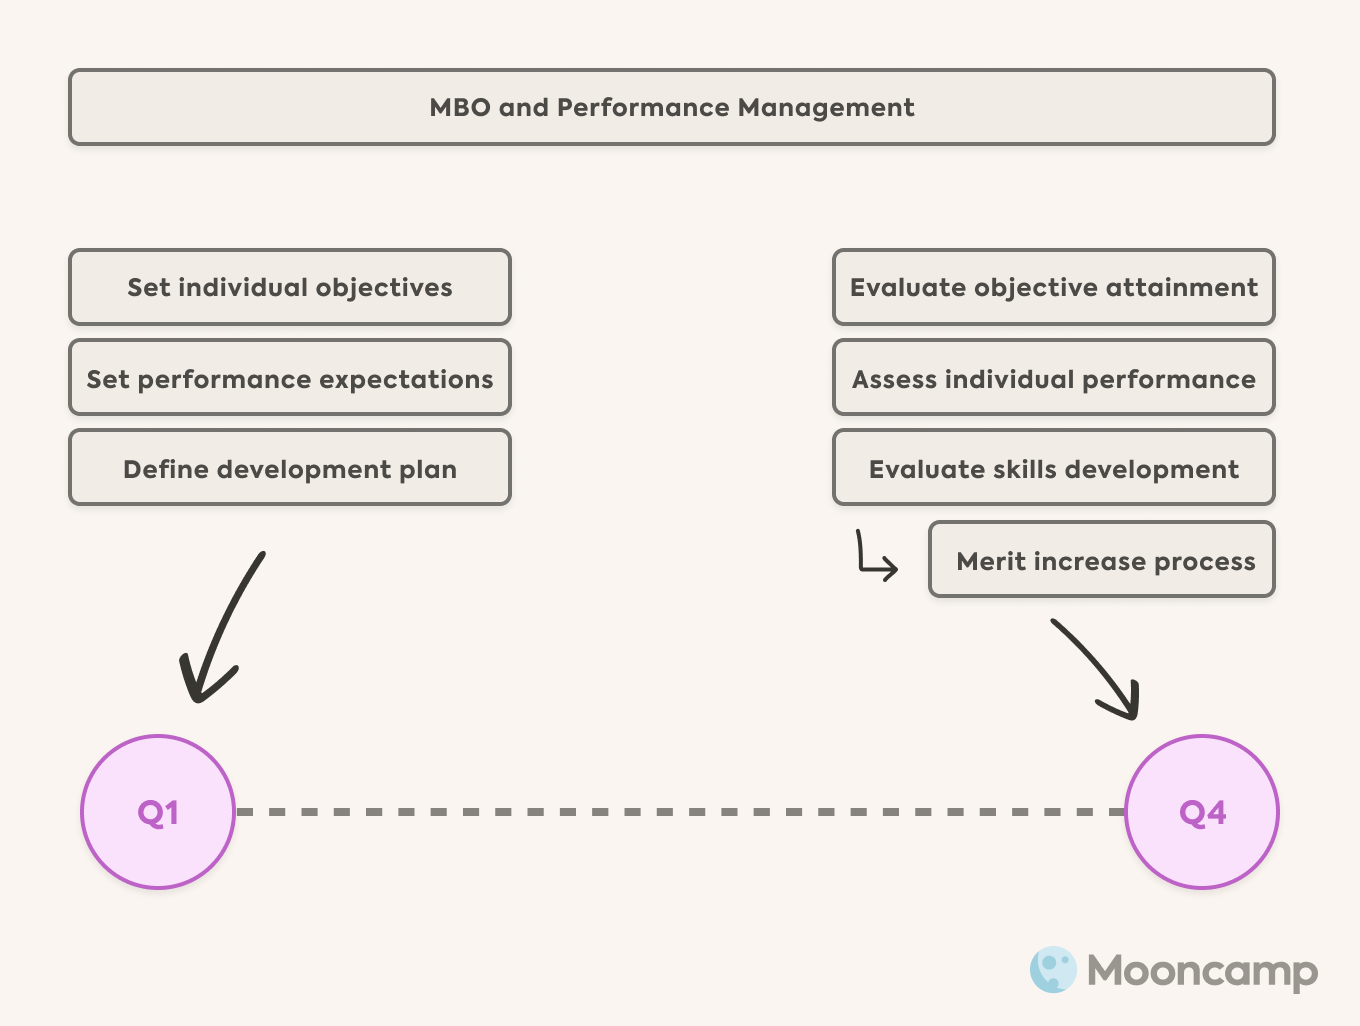 MBO und traditionelles Performance Management